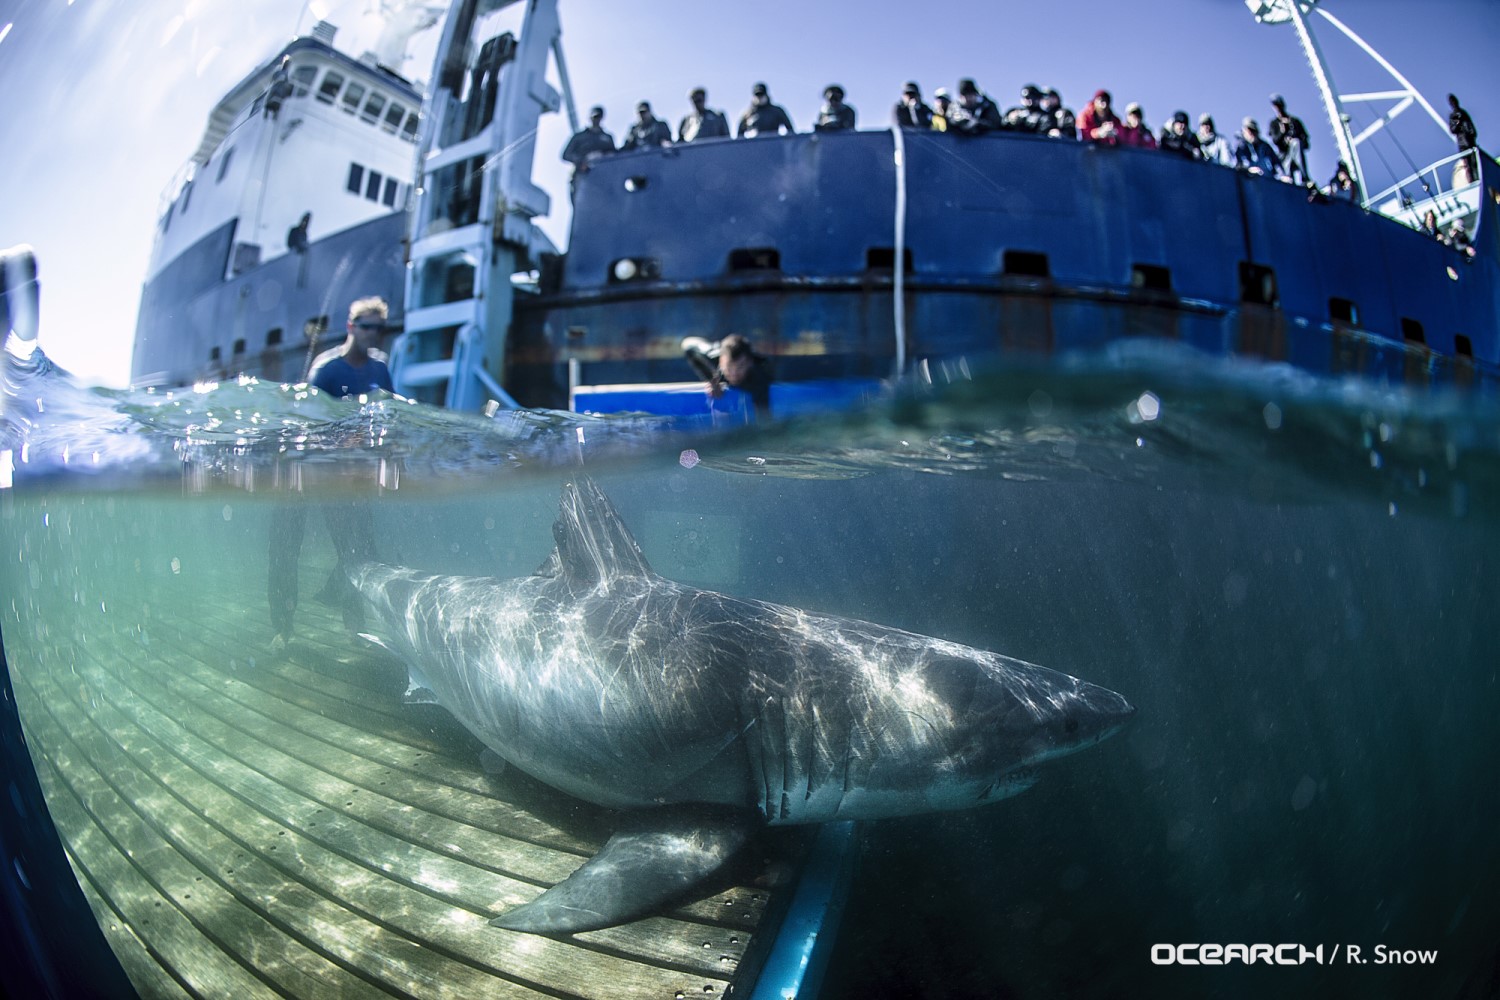 A shark swimming away from the underwater deck of the OCEARCH vessel. Nova, PHOTO CREDIT: R. Snow, OCEARCH